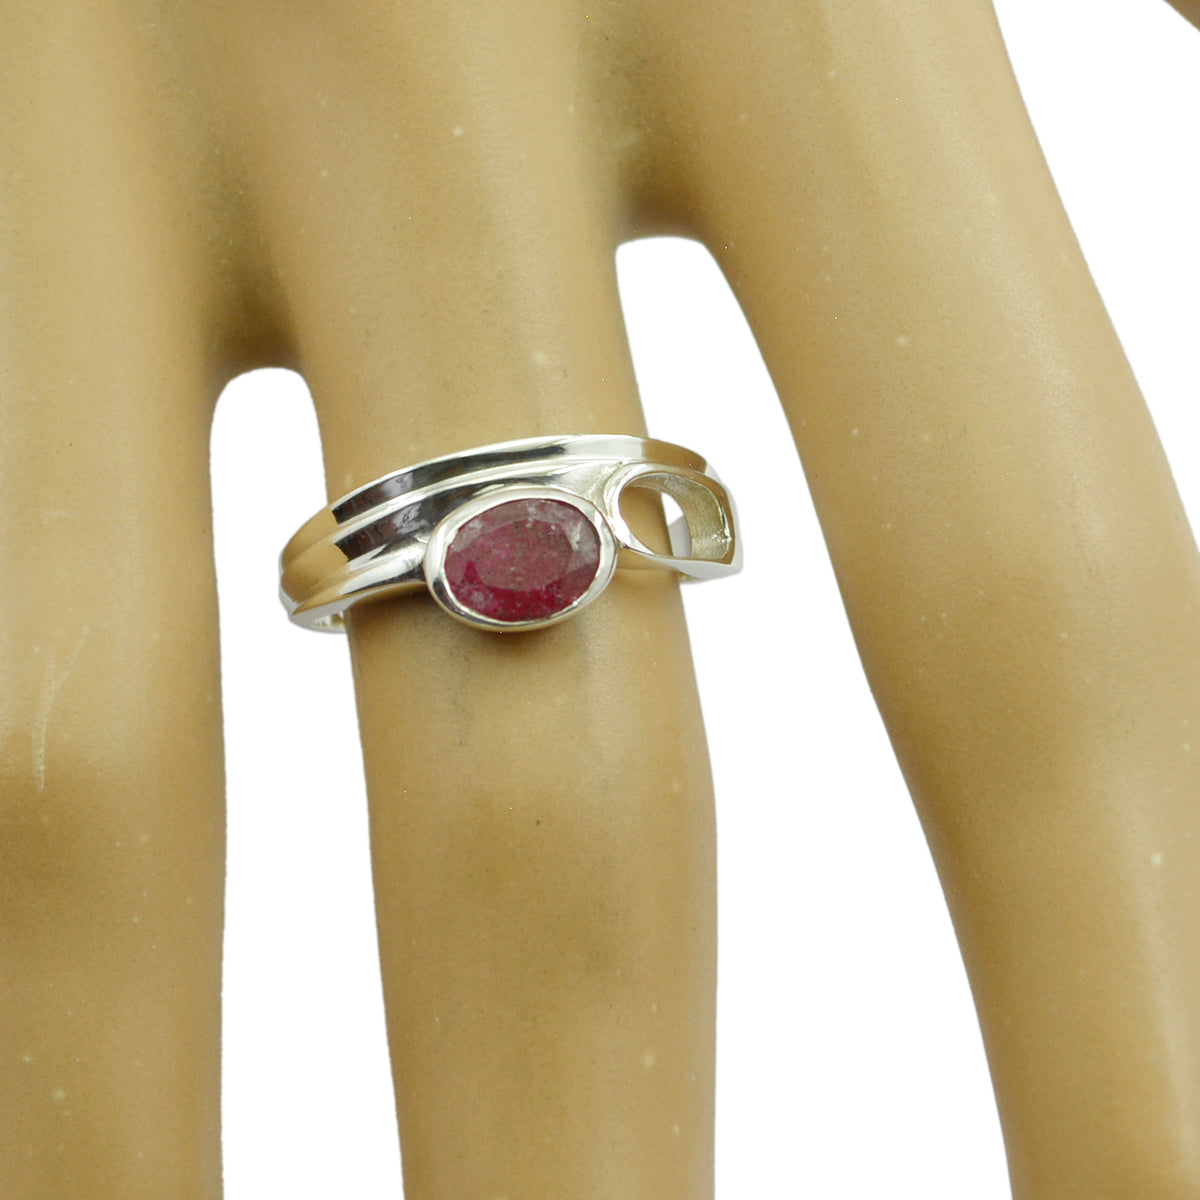 Attractive Stone Indianruby Sterling Silver Ring Jewelry Making Class